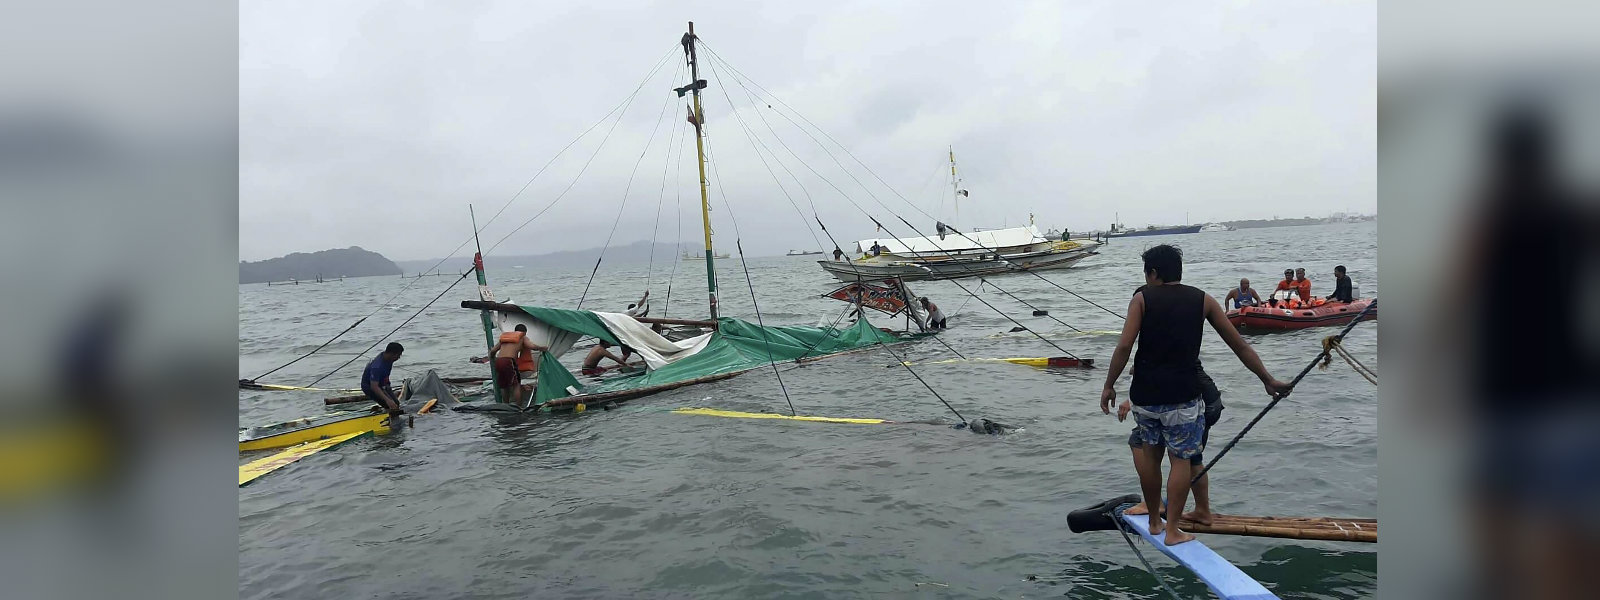 31 dead after boats capsized in central Philippine